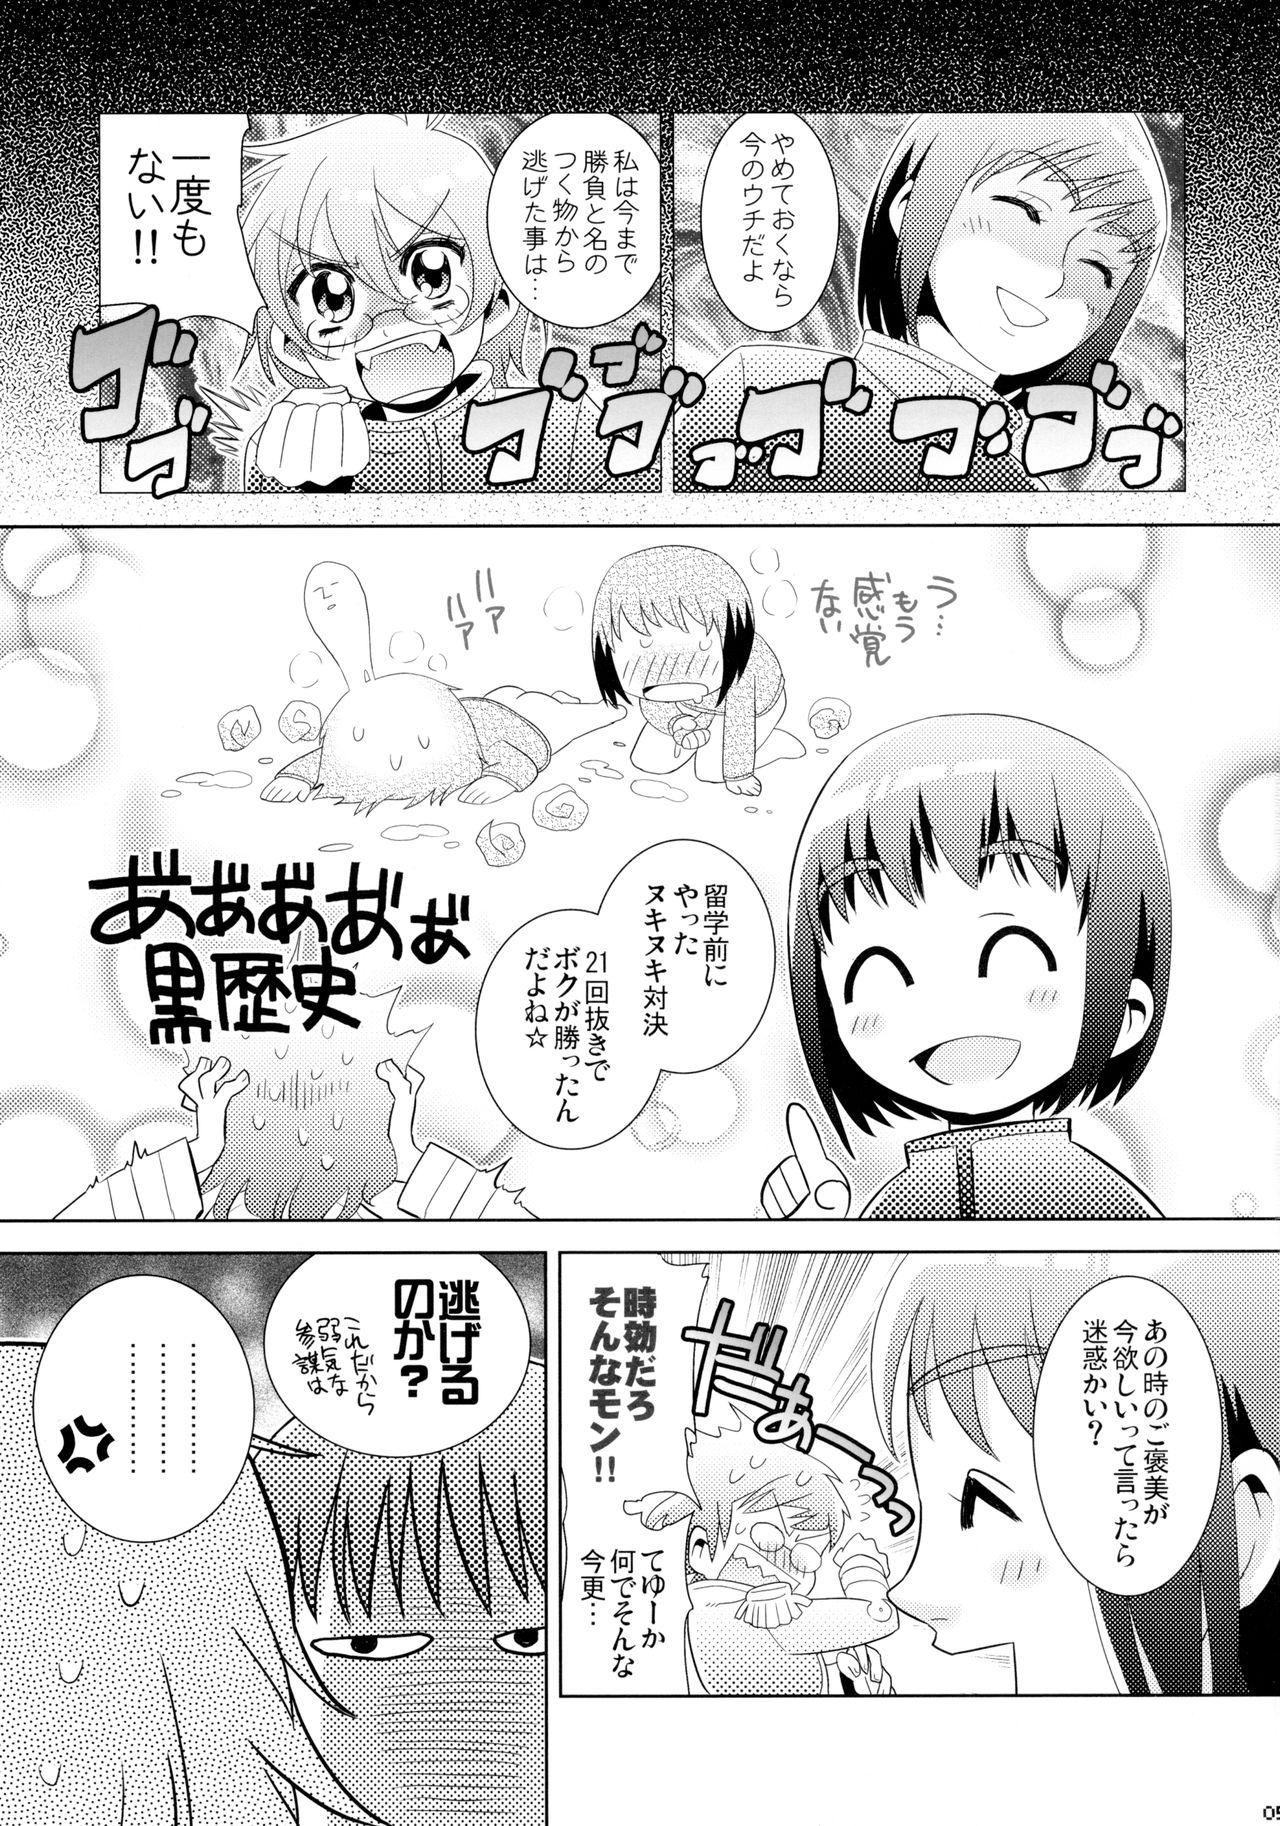 Best Blowjobs Moegi no Hatou Fucked - Page 5